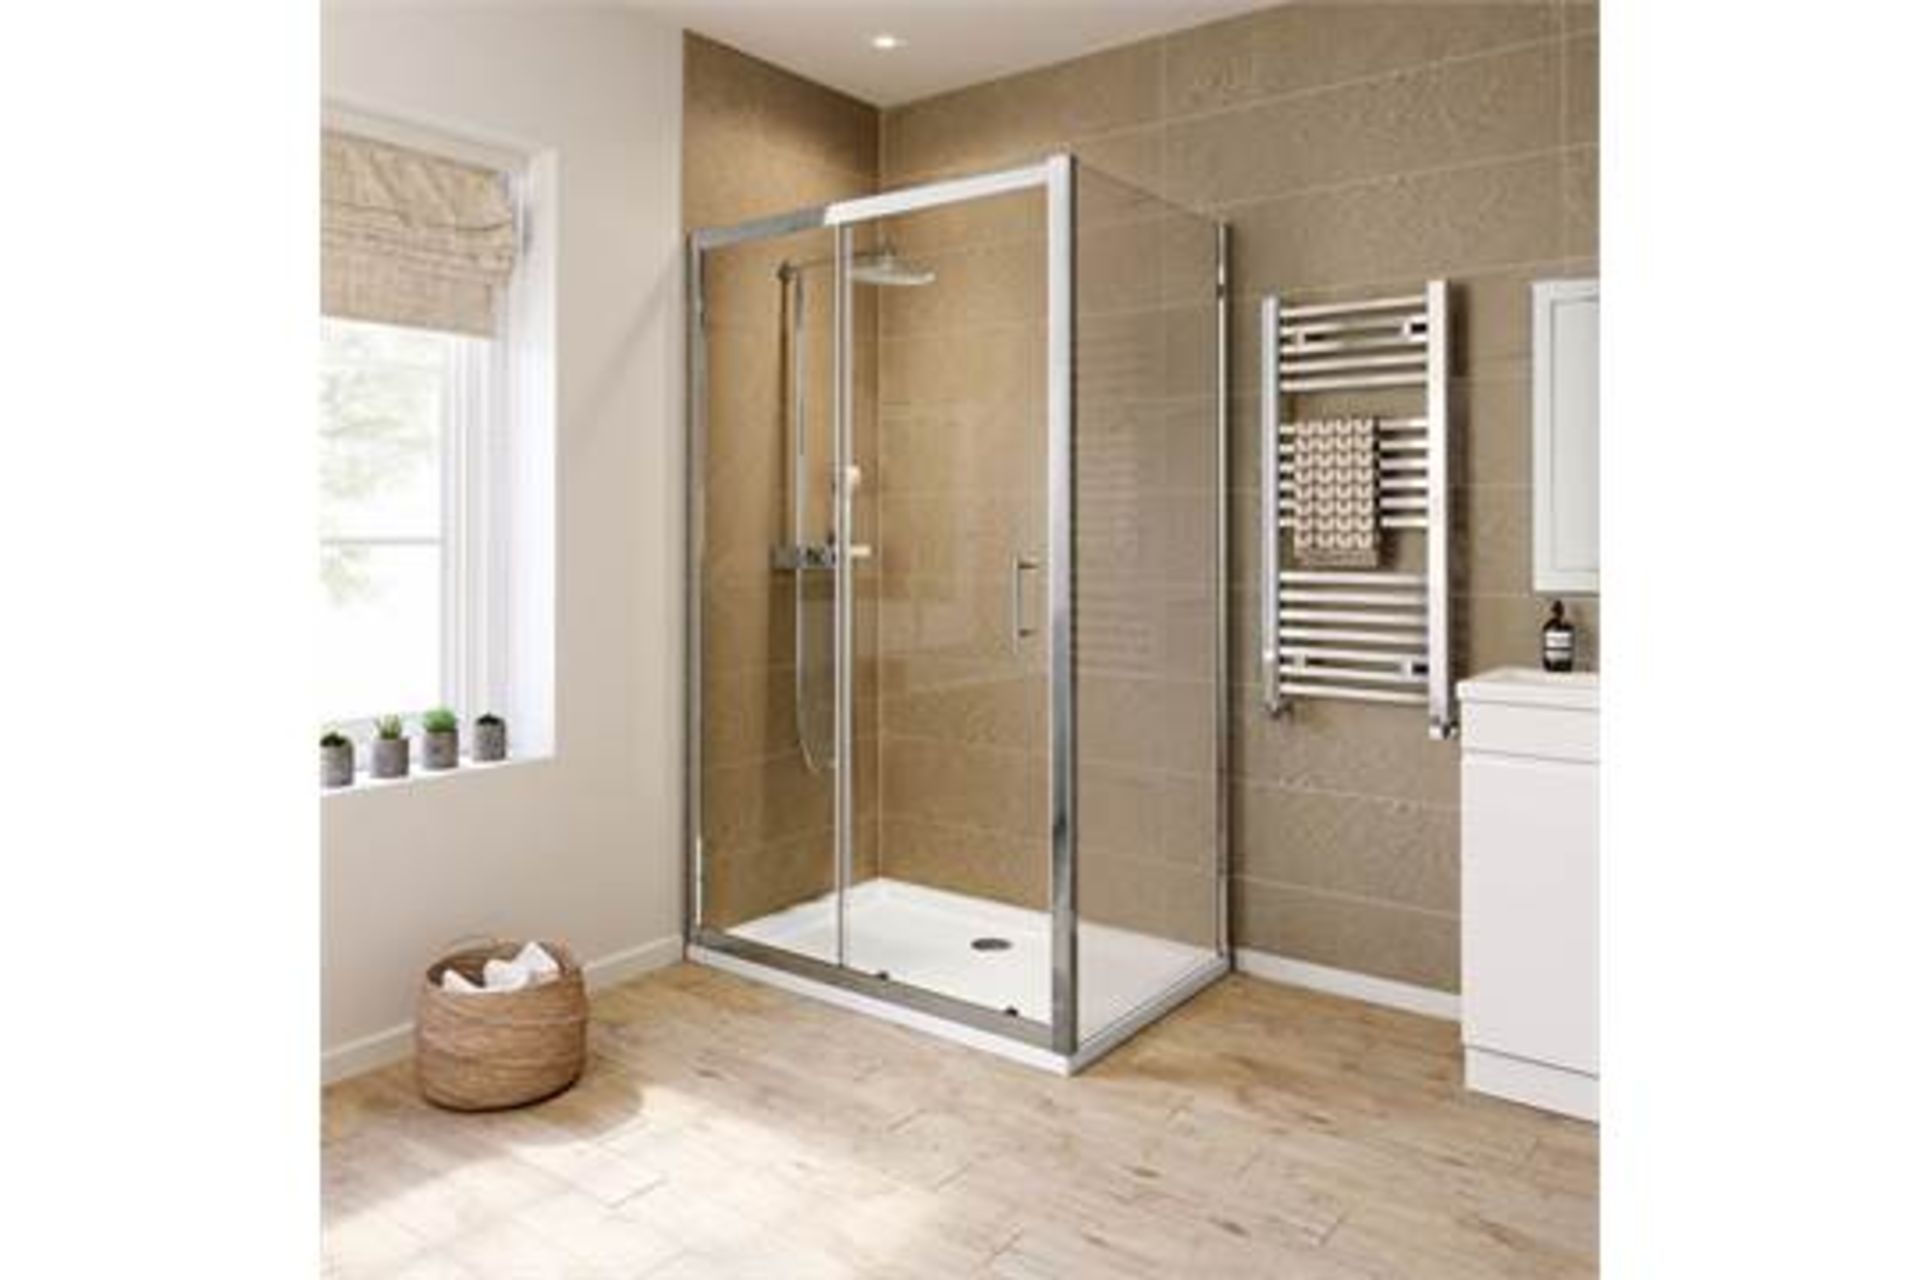 New (H113) 1000x800mm - 8mm - Sliding Door Shower Enclosure. RRP £899.99.6mm Safety Glass Full...